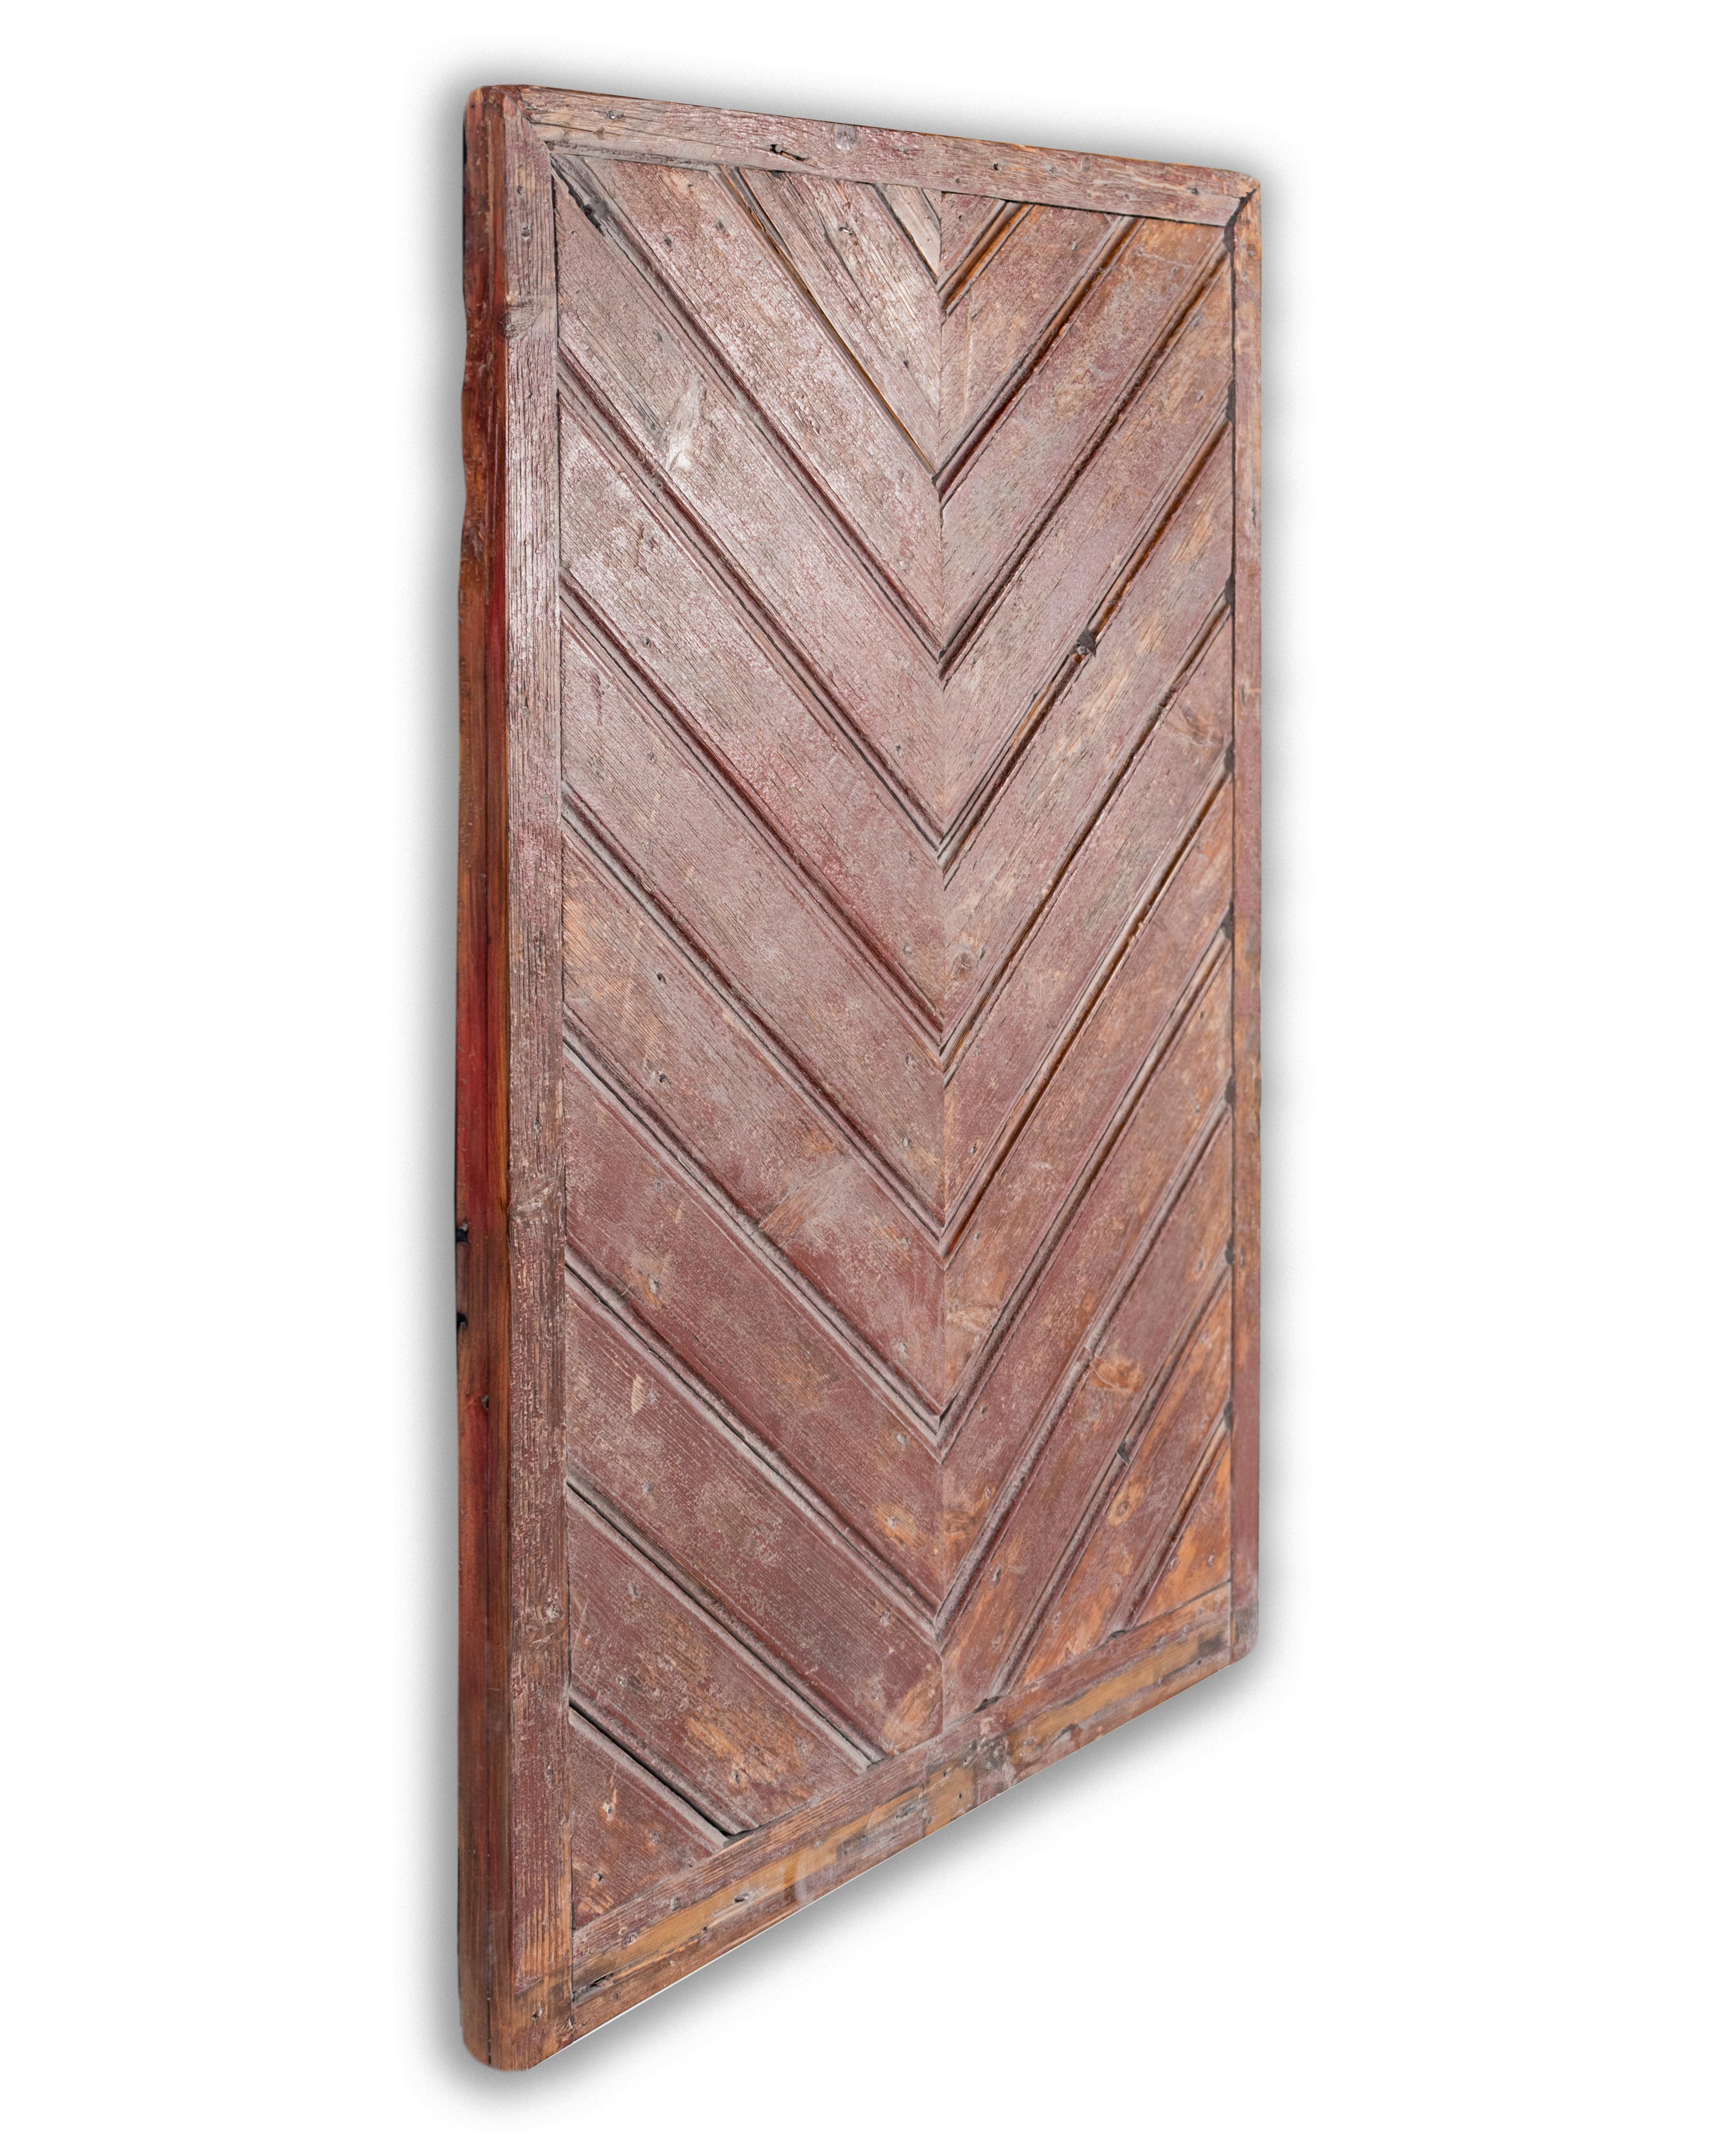 Original paint patina wood door element, evidencing wear and age. Wall decor 
In my organic, contemporary, vintage and mid-century modern aesthetic.
This piece is a part of Brendan Bass’s one-of-a-kind collection, Le Monde. French for “The World”,